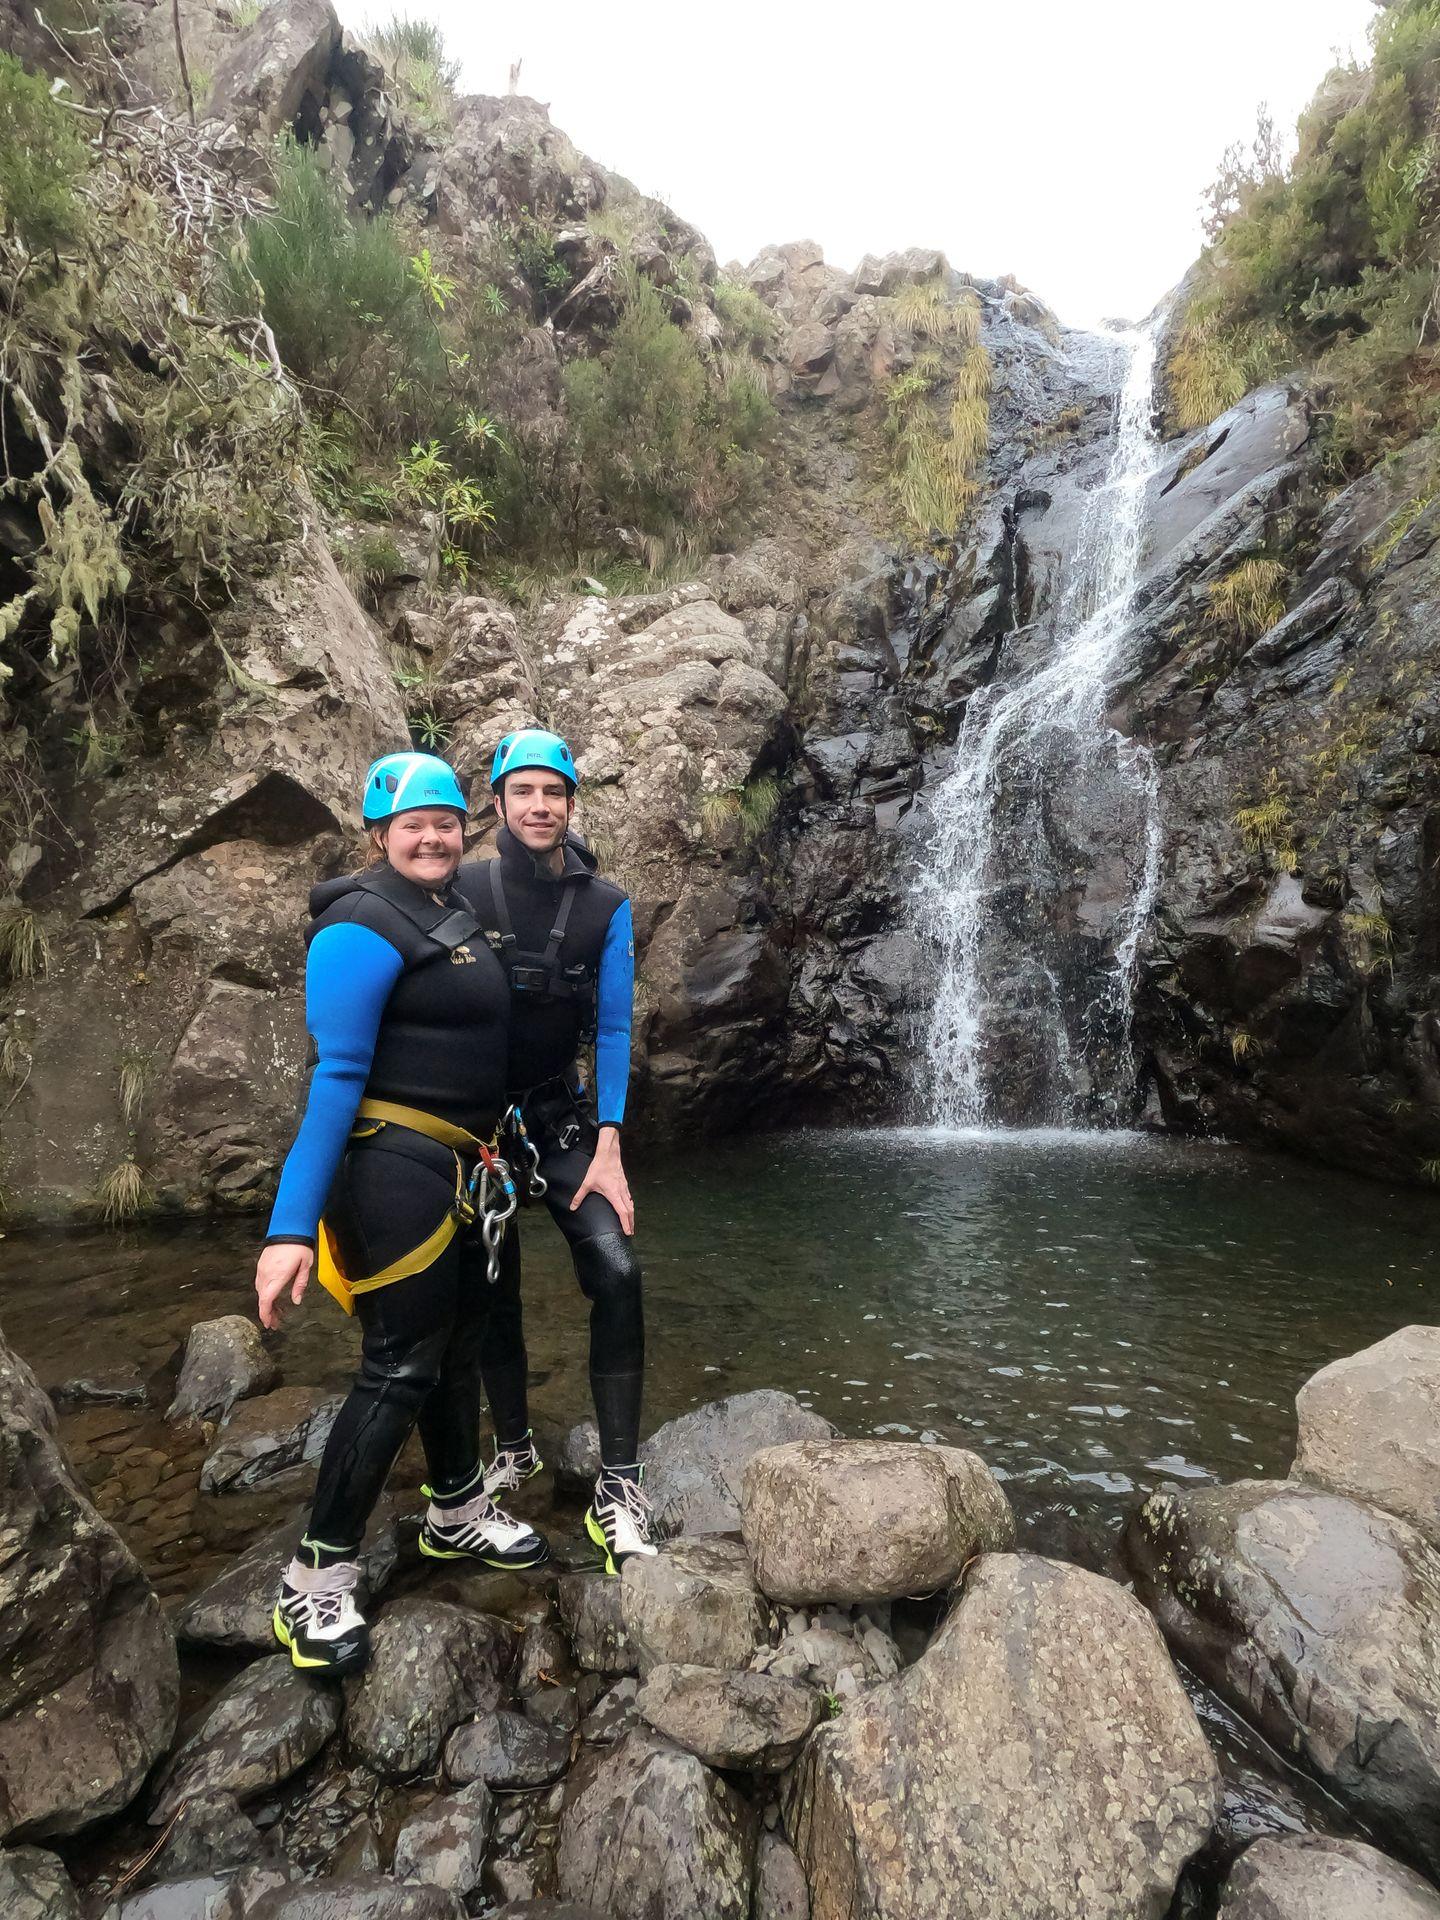 Lydia and Joe standing in front of a waterfall wearing wet suits while canyoneering in Madeira